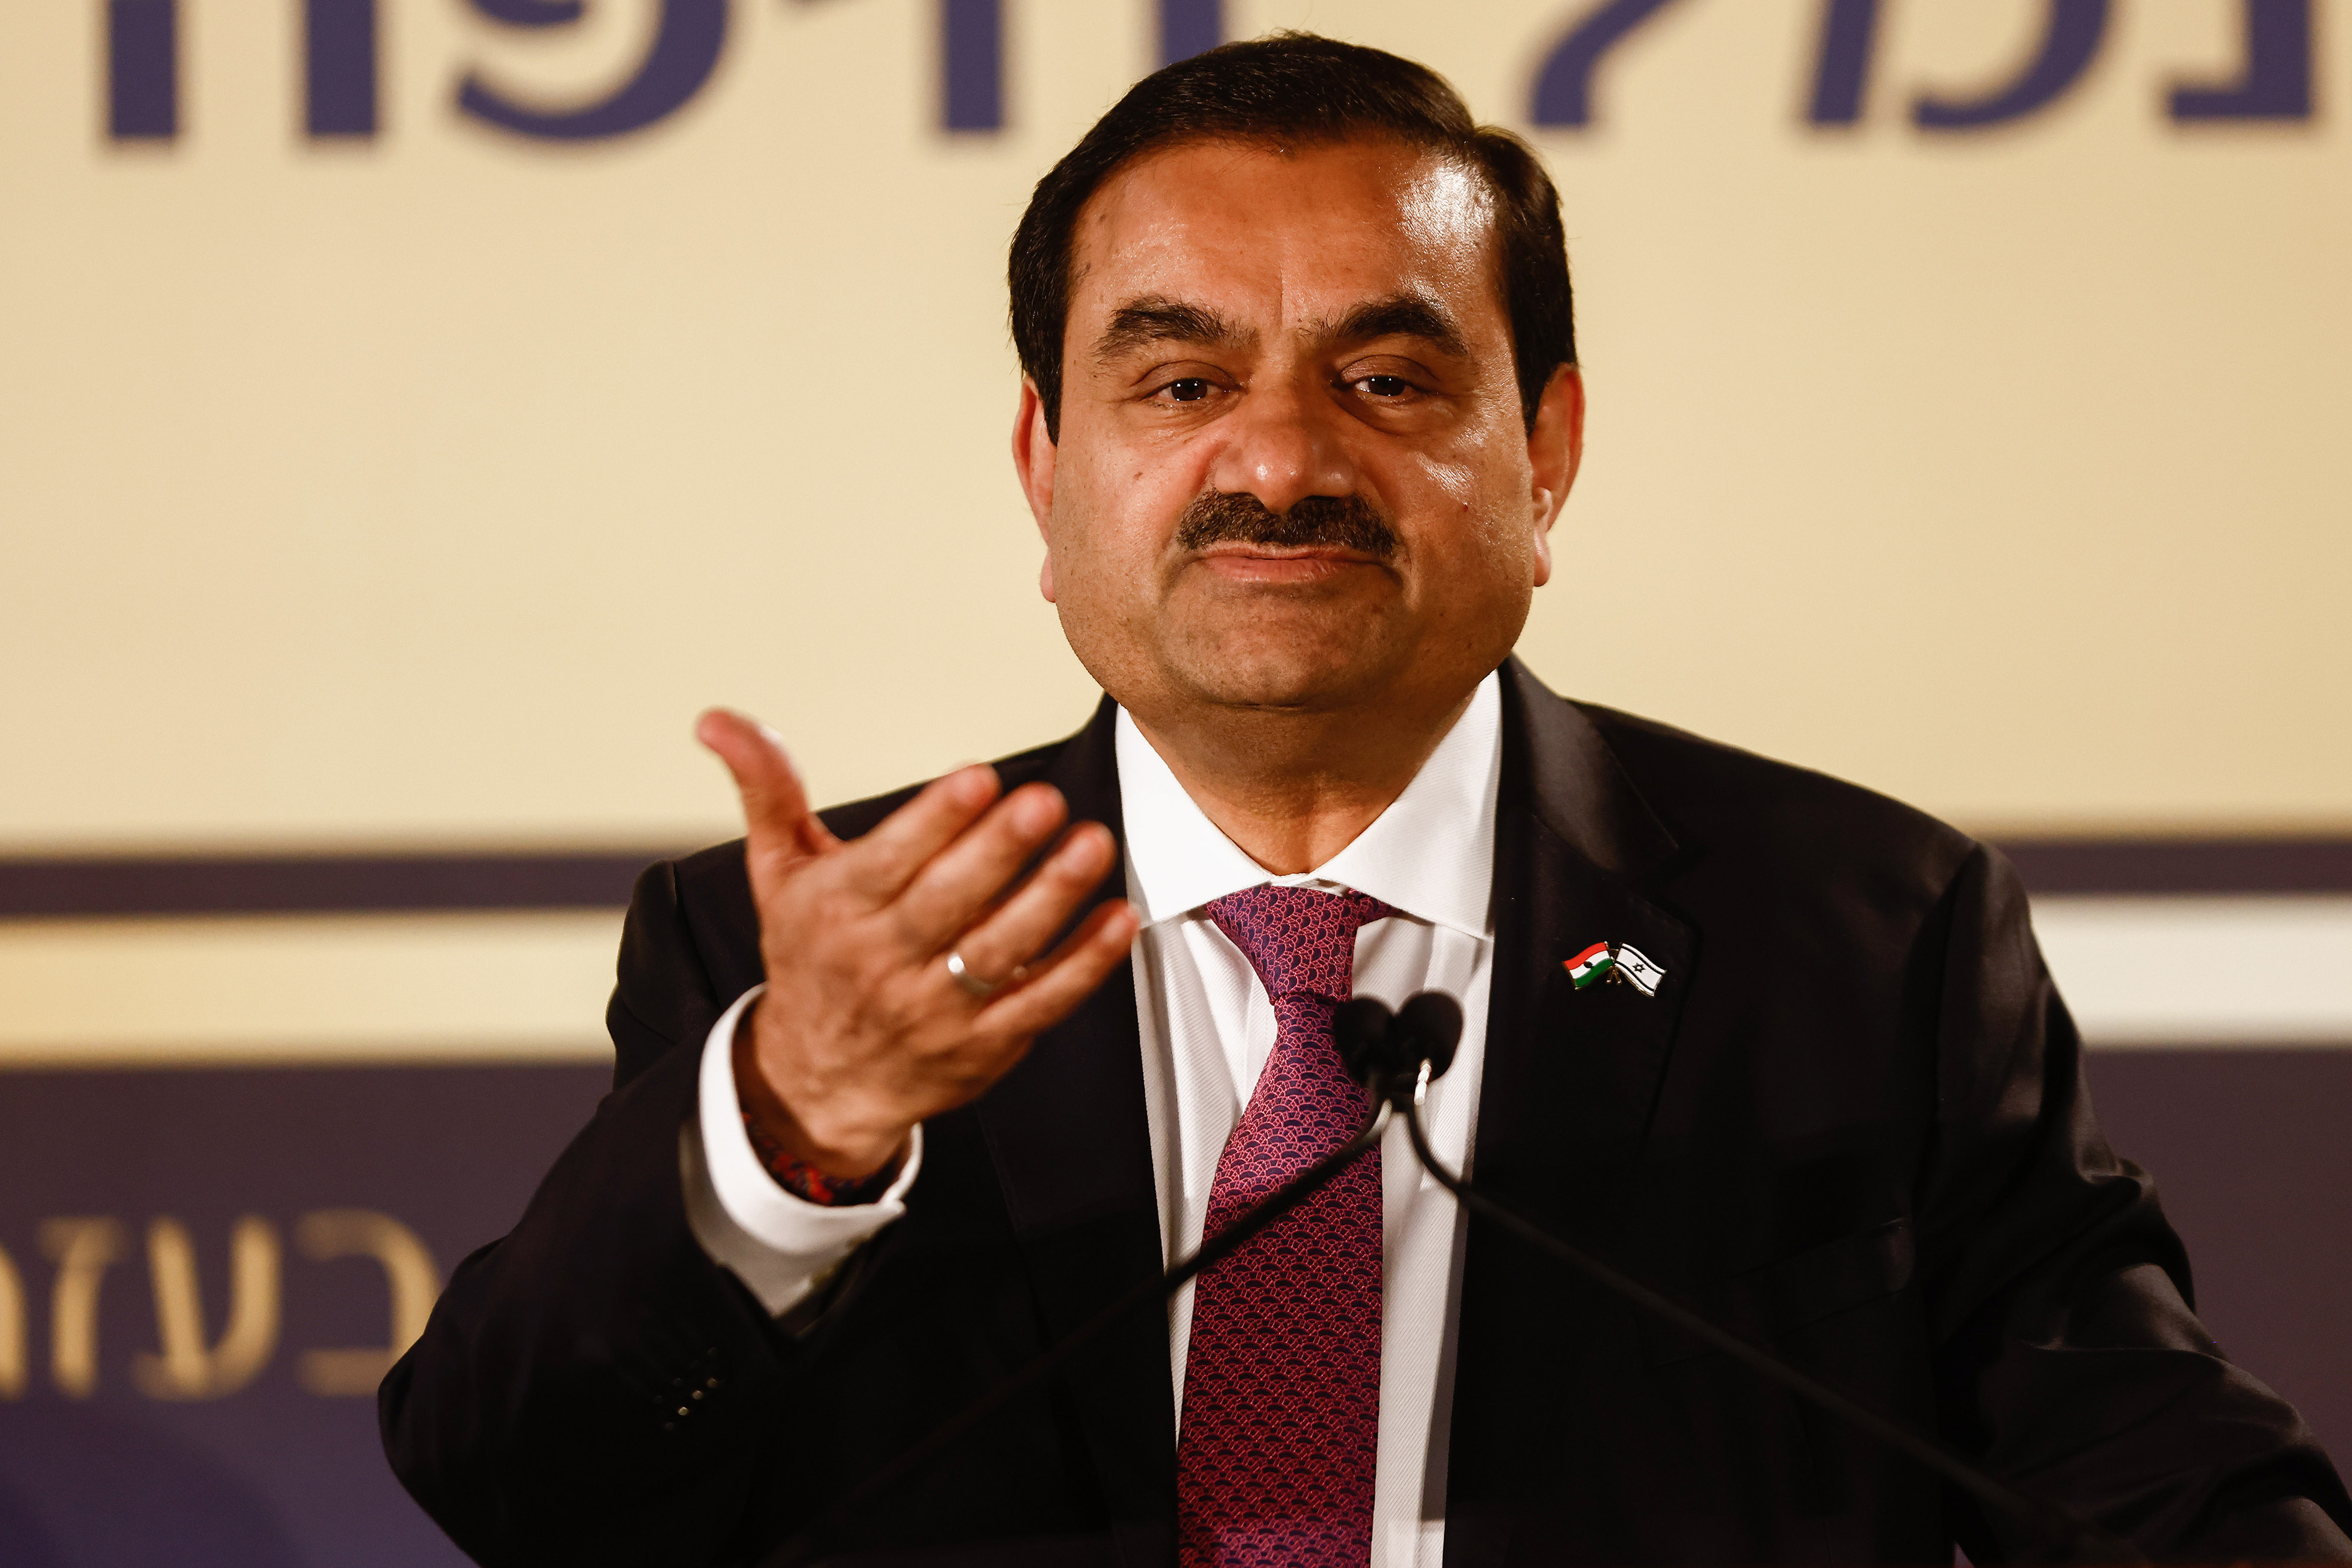 Adani: Why Doesn't the Indian Tycoon Disclose Potential Conflicts? -  Bloomberg